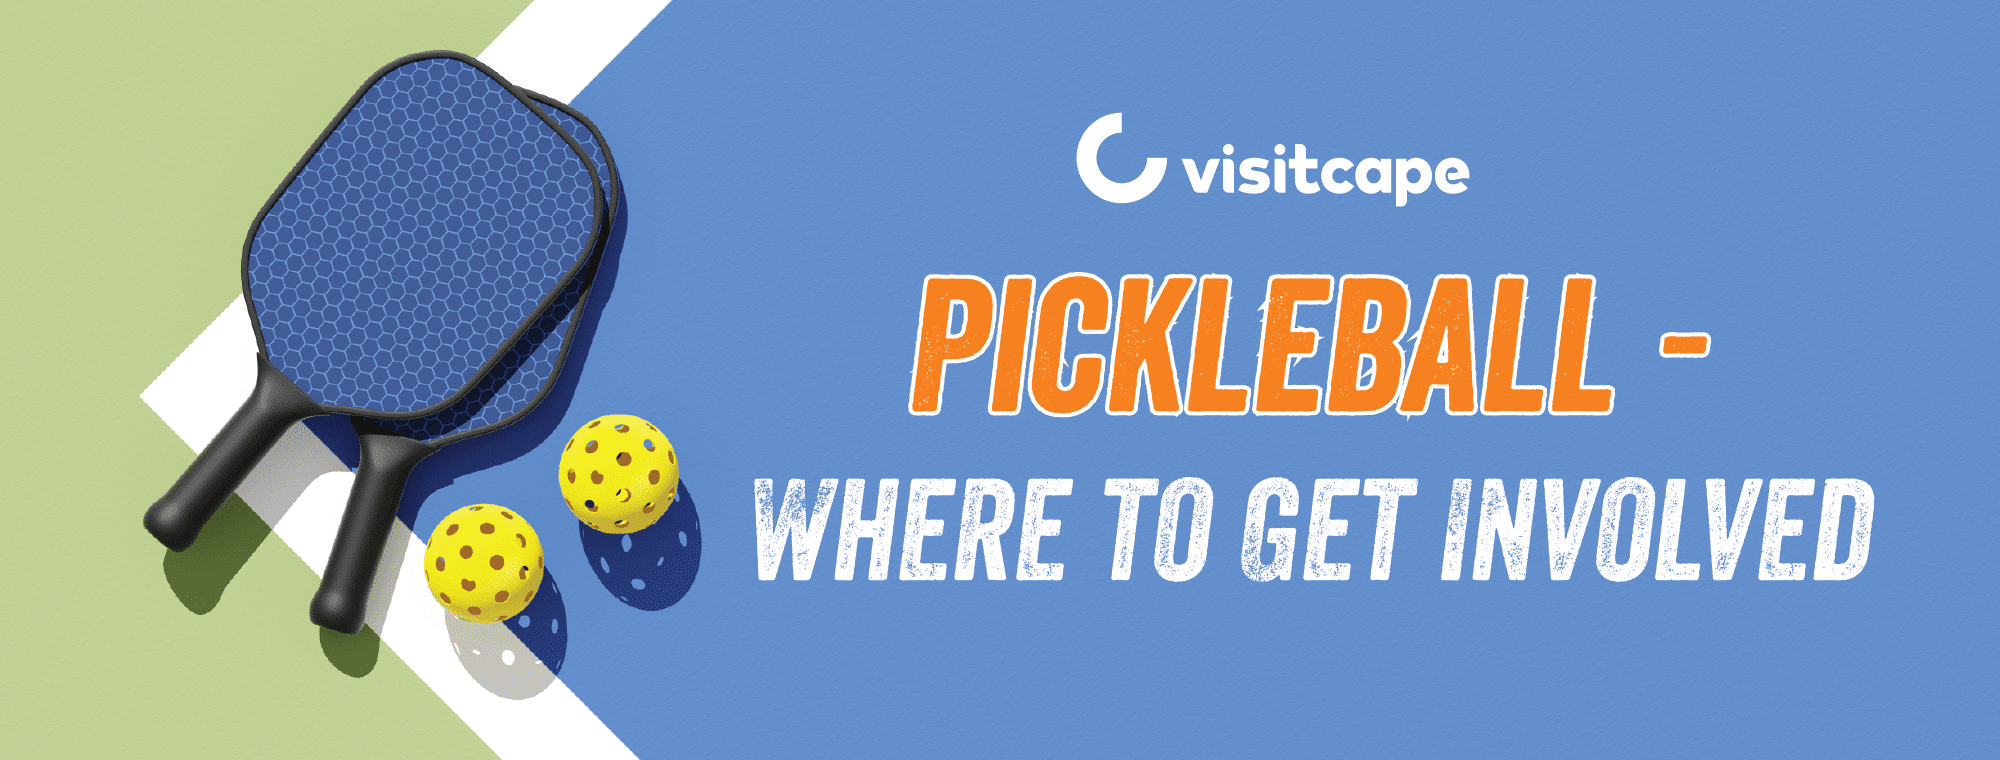 "Pickleball - Where to get involved" with a pickleball court background